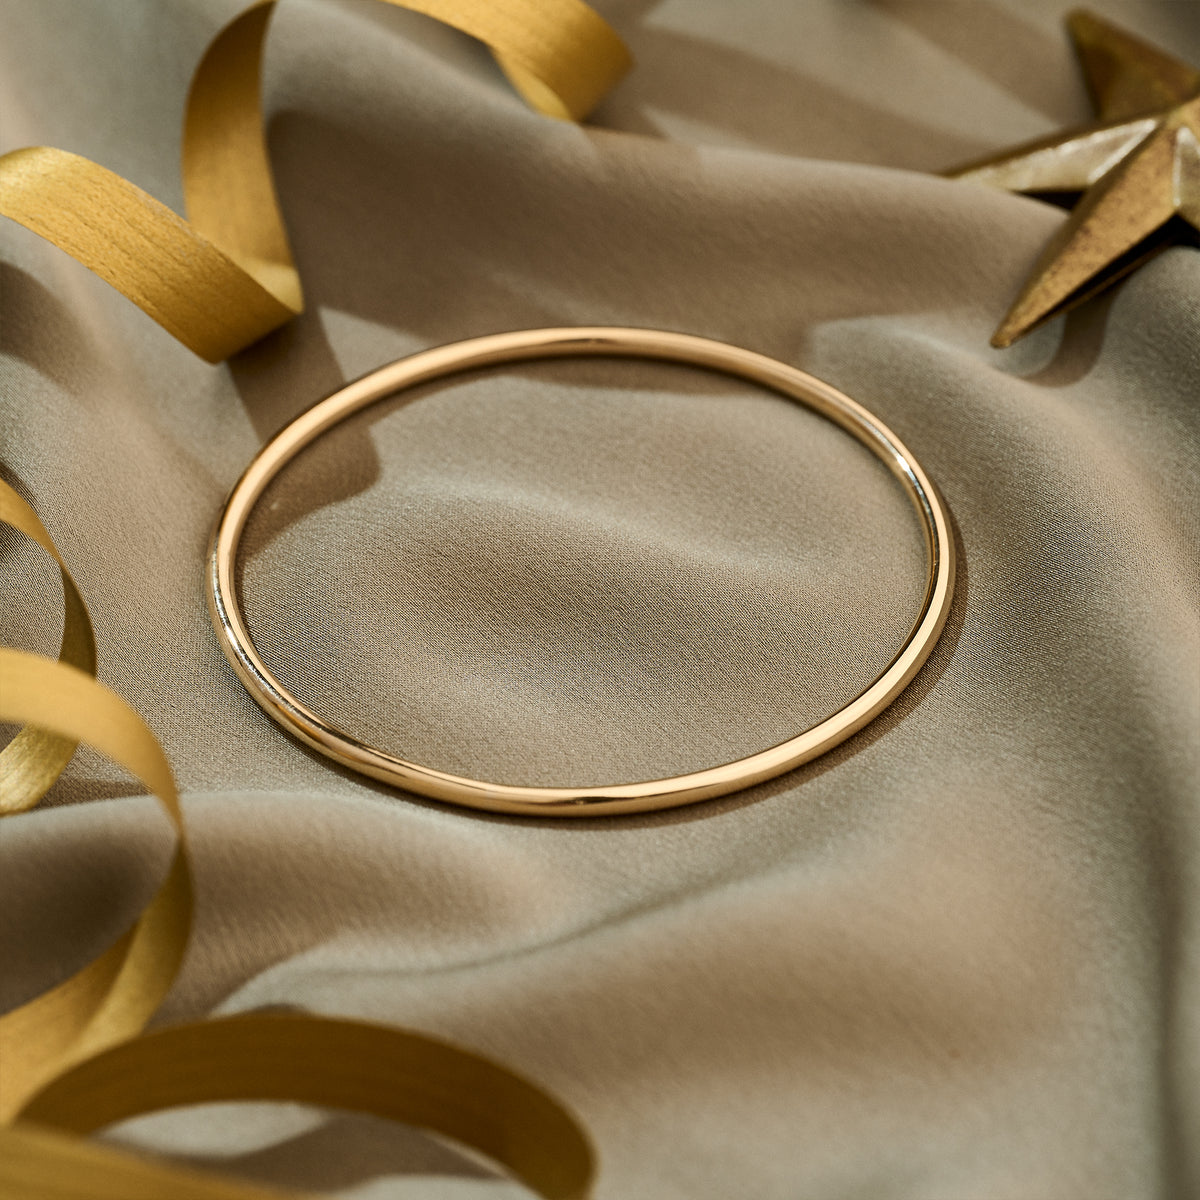 Plain Recycled Solid 9ct Gold Bangle - 3mm Round Wire